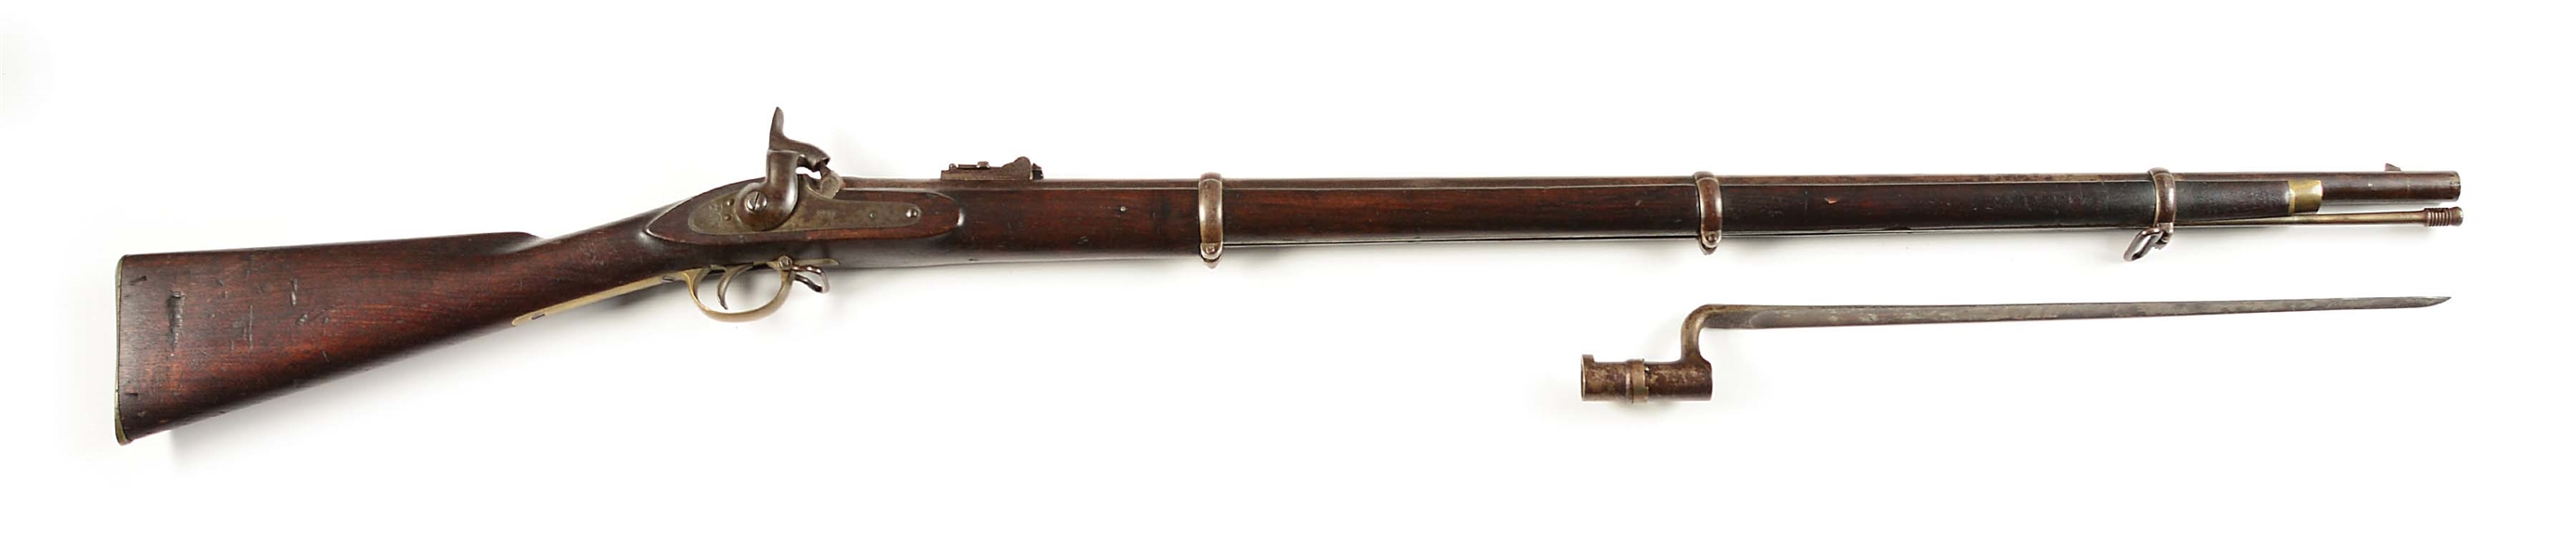 (A) SCARCE CIVIL WAR MOORE ENFIELD PATTERN 1853 ENFIELD PERCUSSION MUSKET, DATED 1863 WITH SOCKET BAYONET.